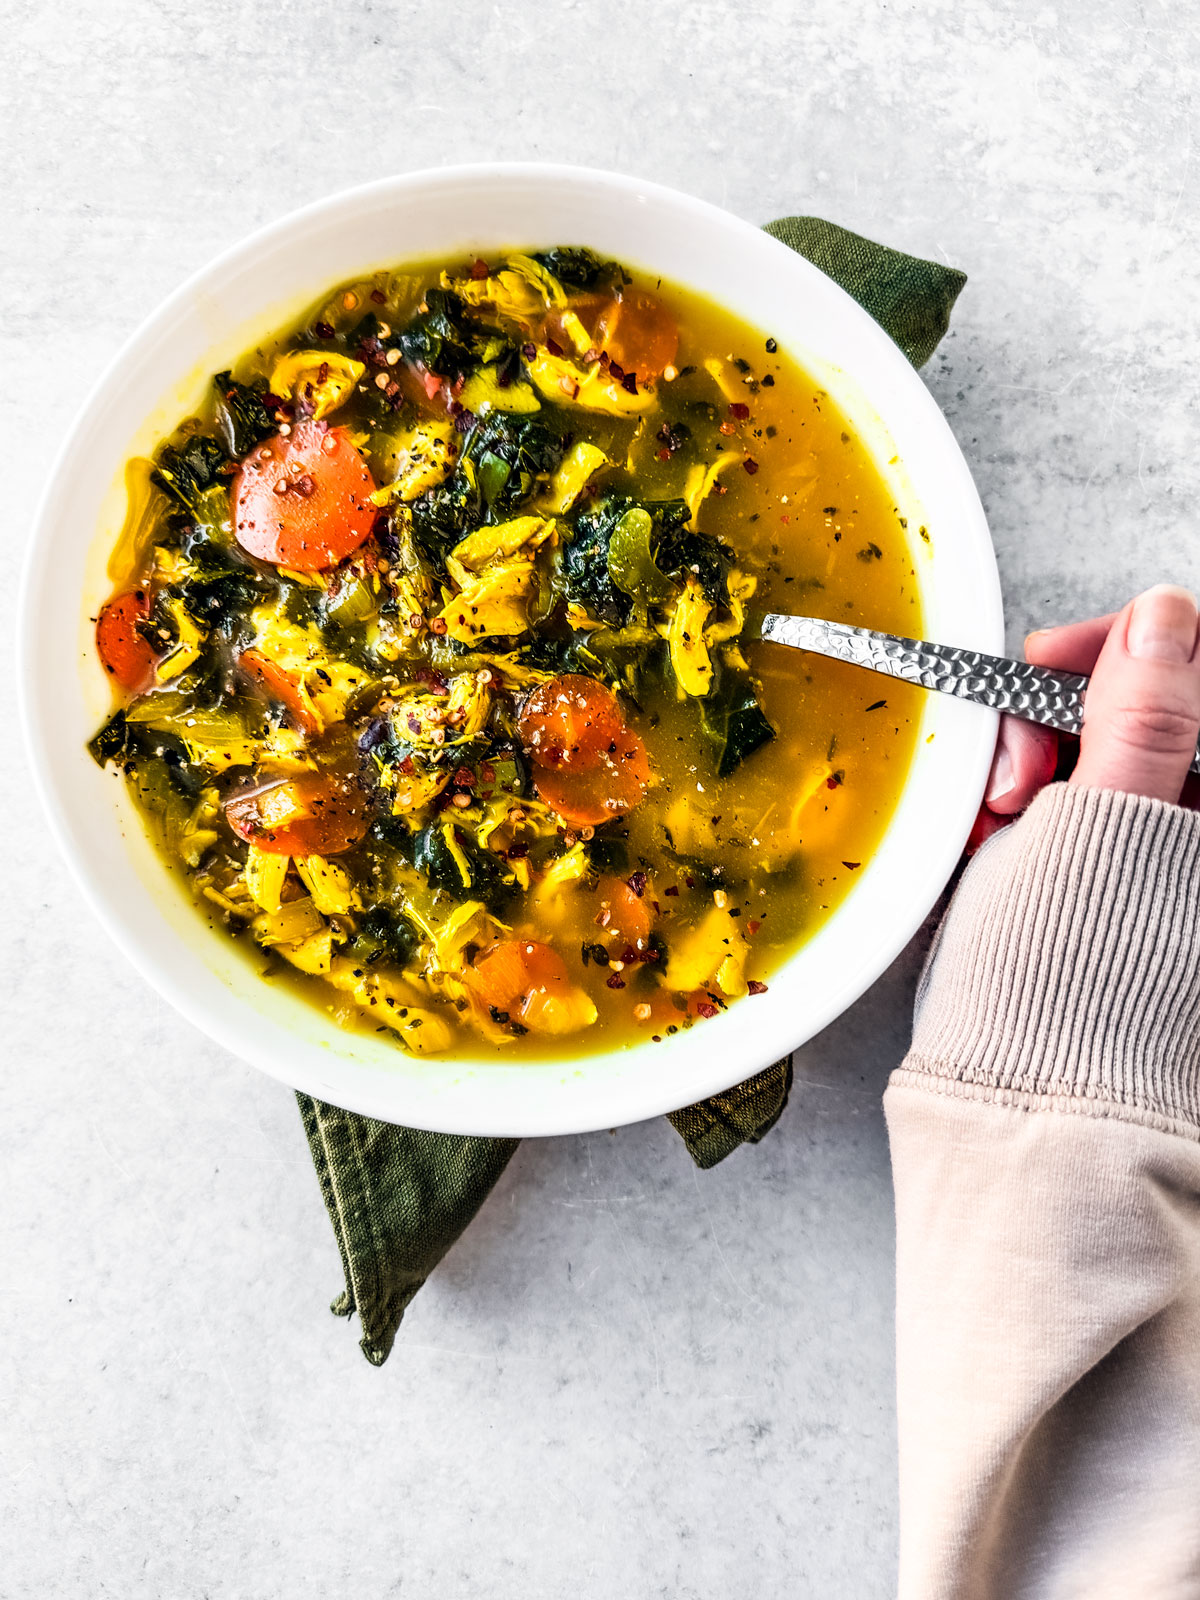 Hand spooning into a bowl of chicken soup with turmeric and ginger.